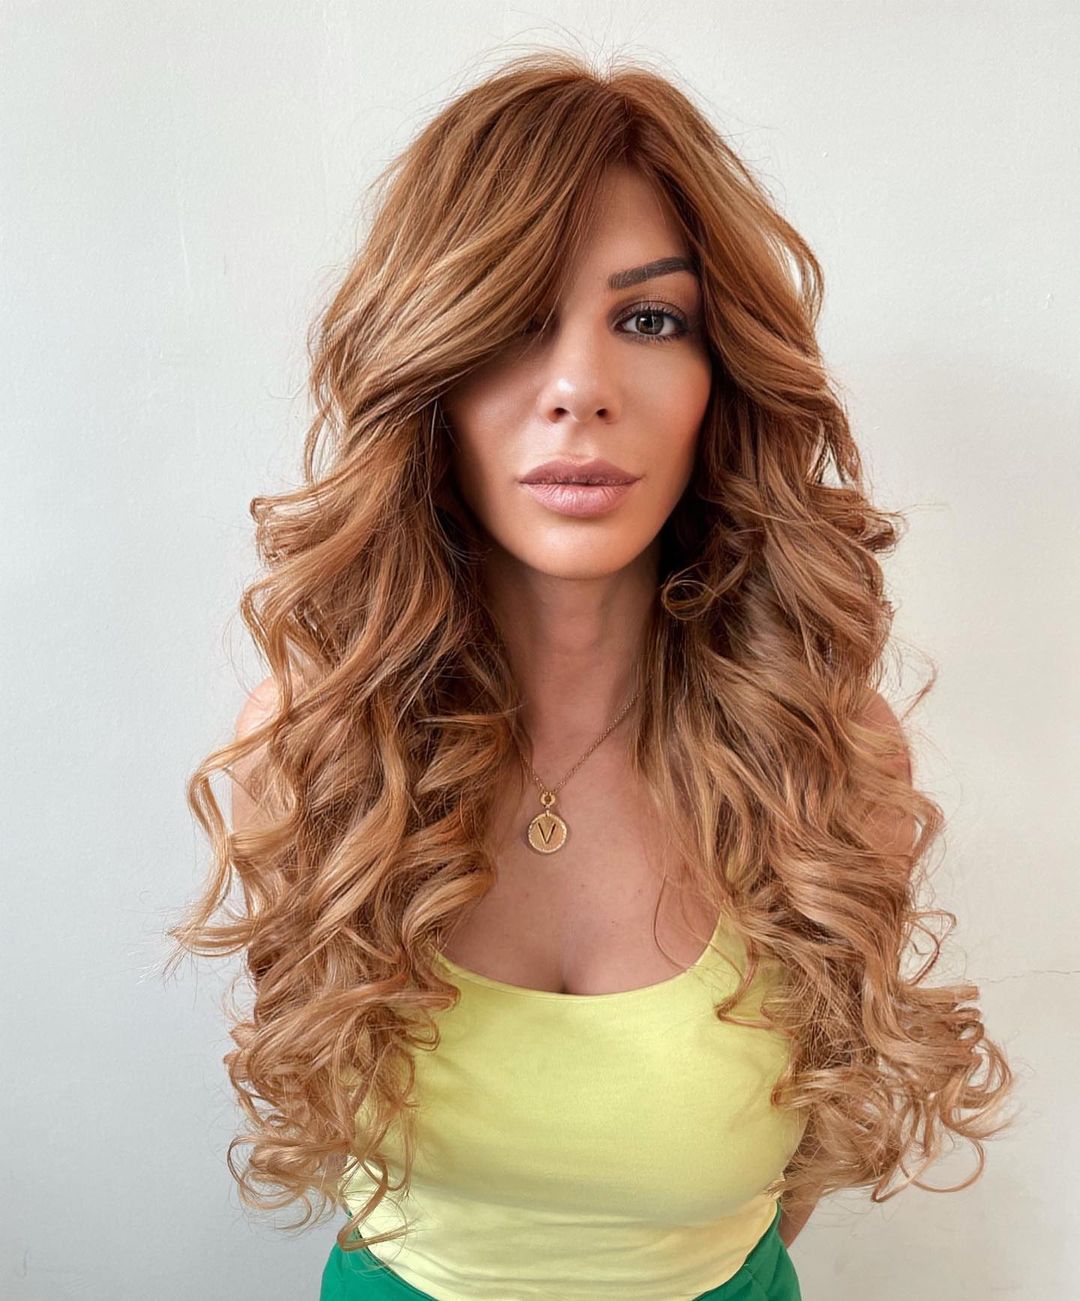 50 Awesome Long Layered Hair Ideas For 2021 images 17